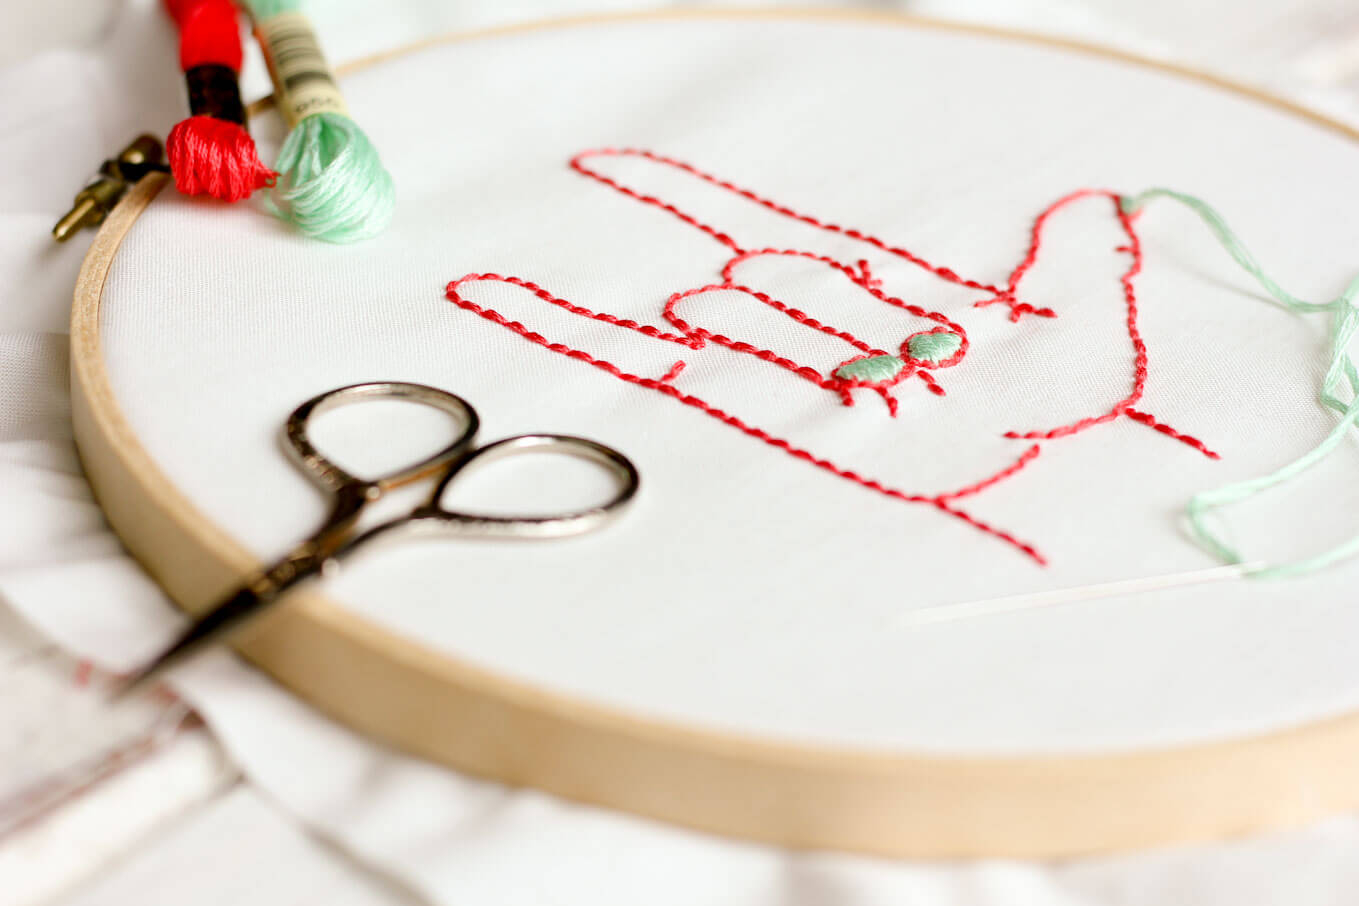 Free Embroidery Pattern I Love You Free Embroidery Pattern Make Do Crew